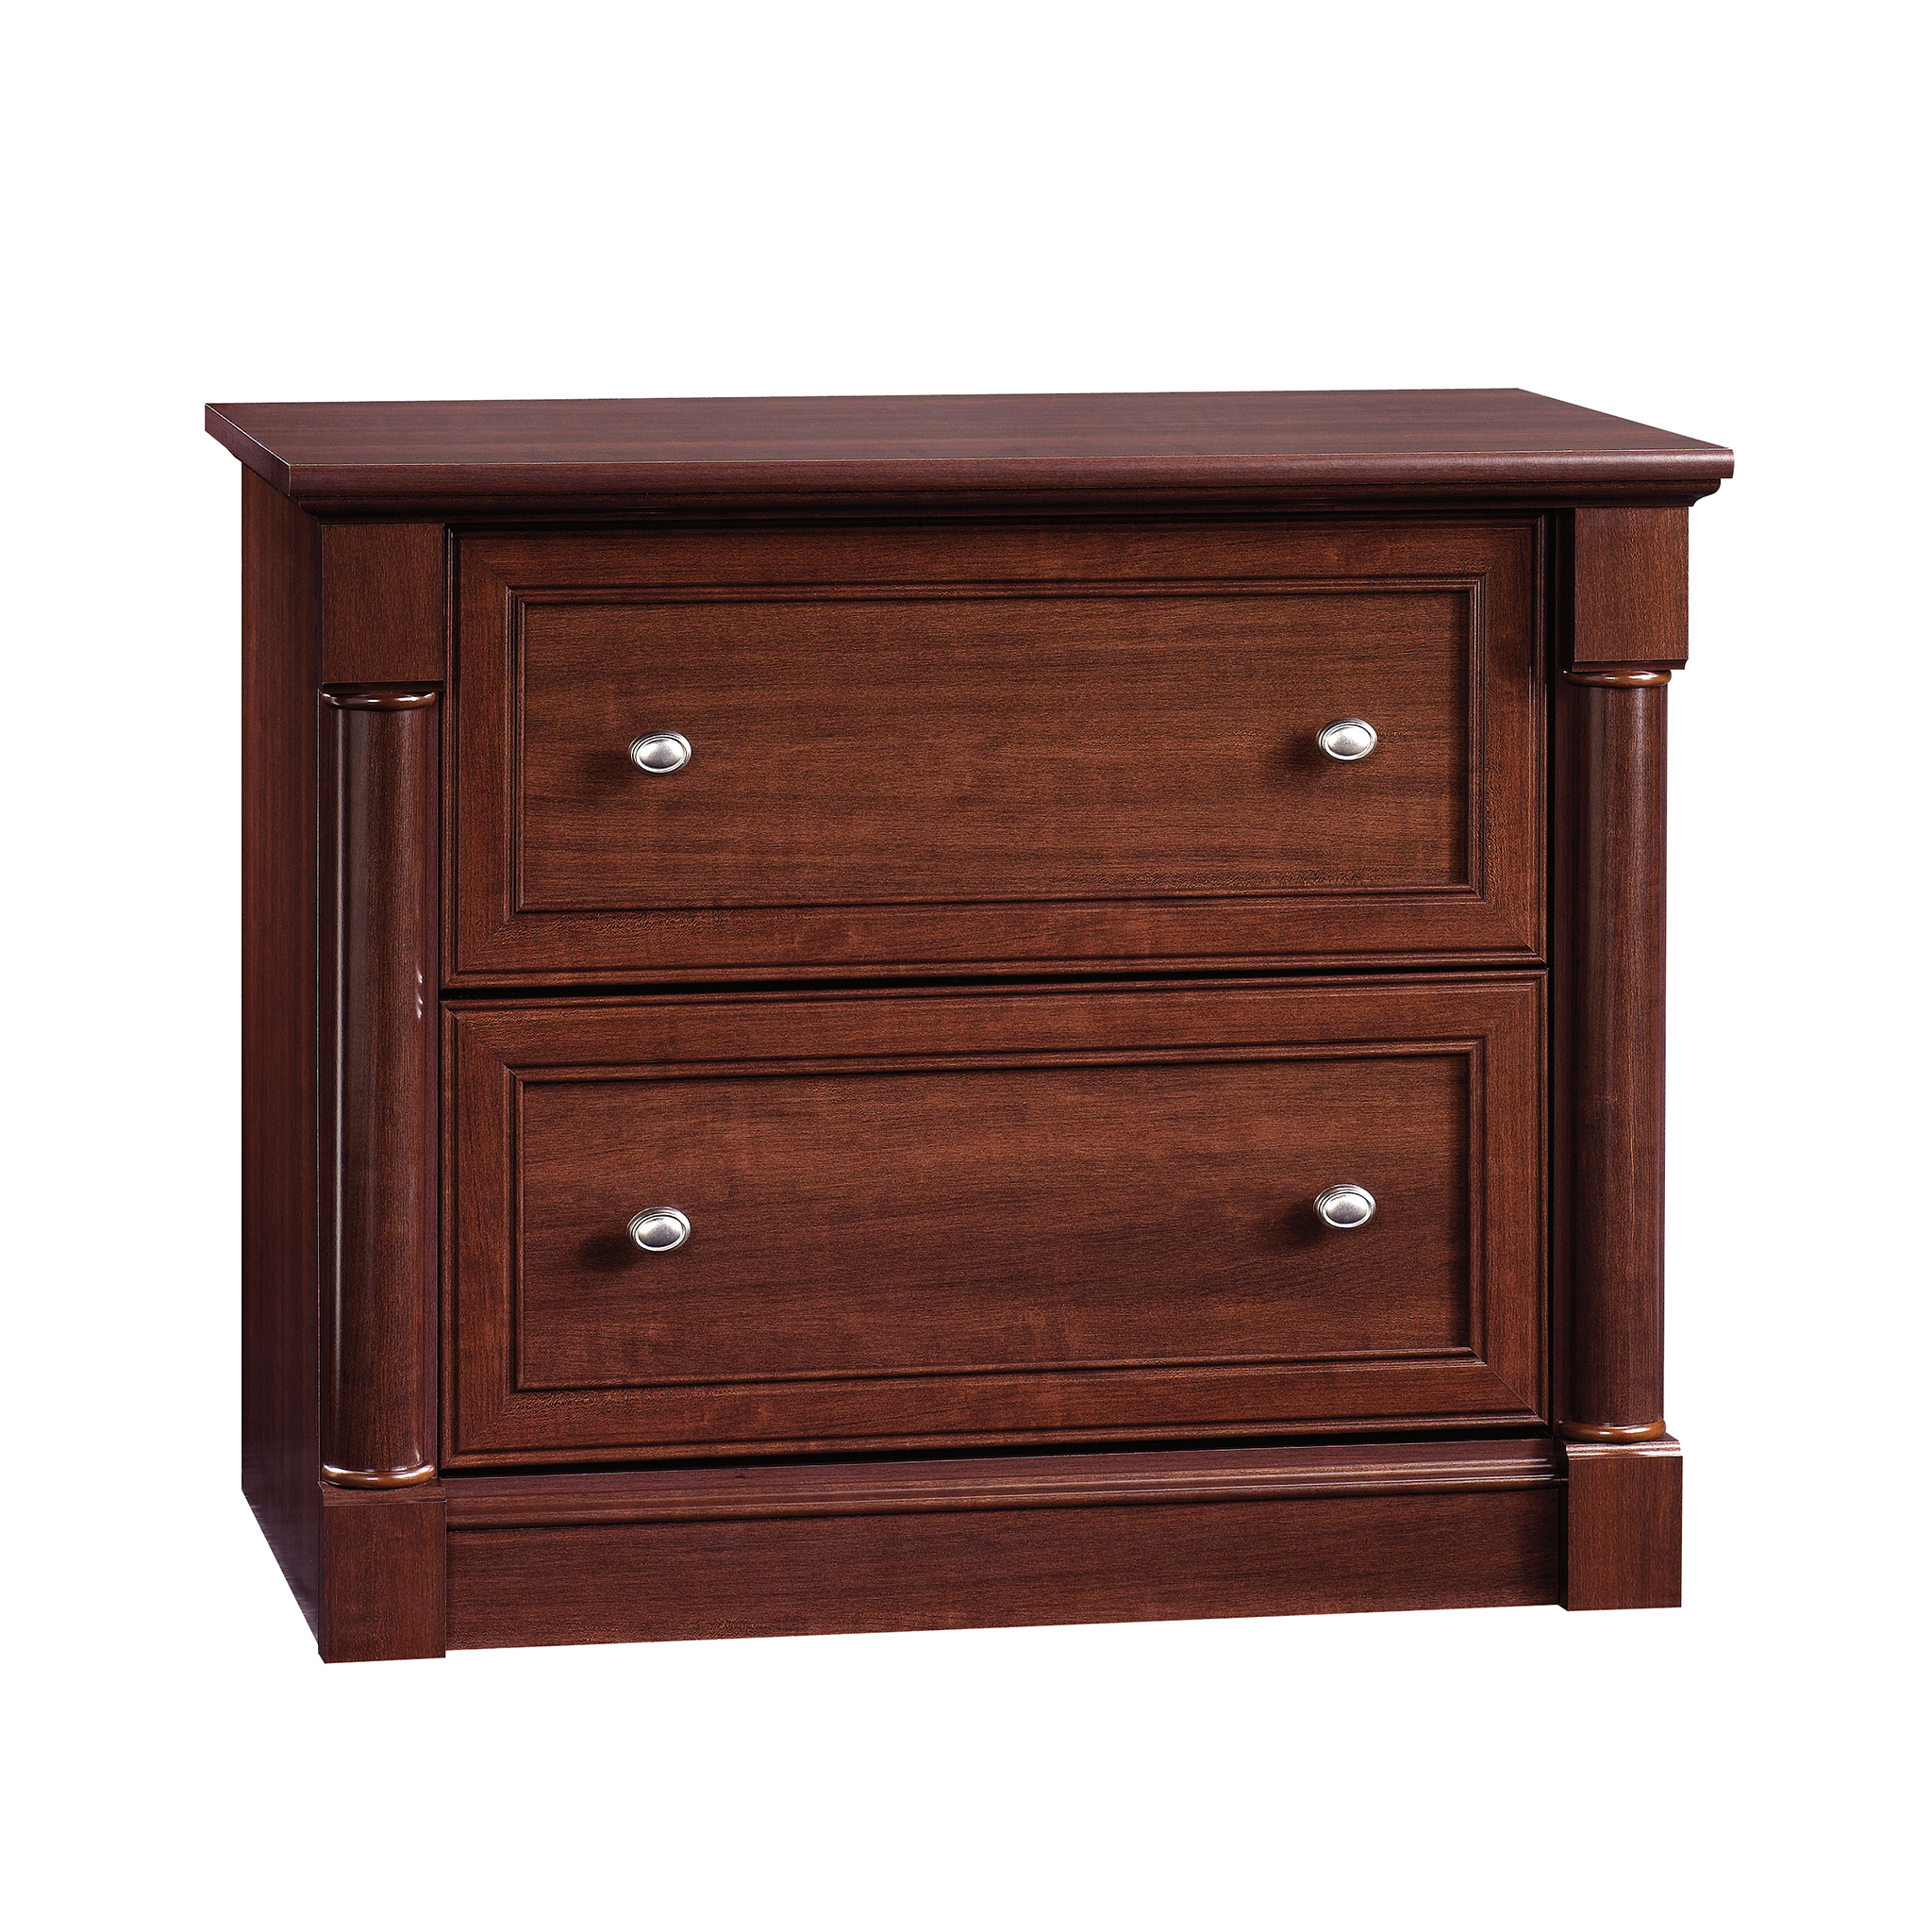 Sauder Palladia Lateral File, Select Cherry Finish - image 1 of 6